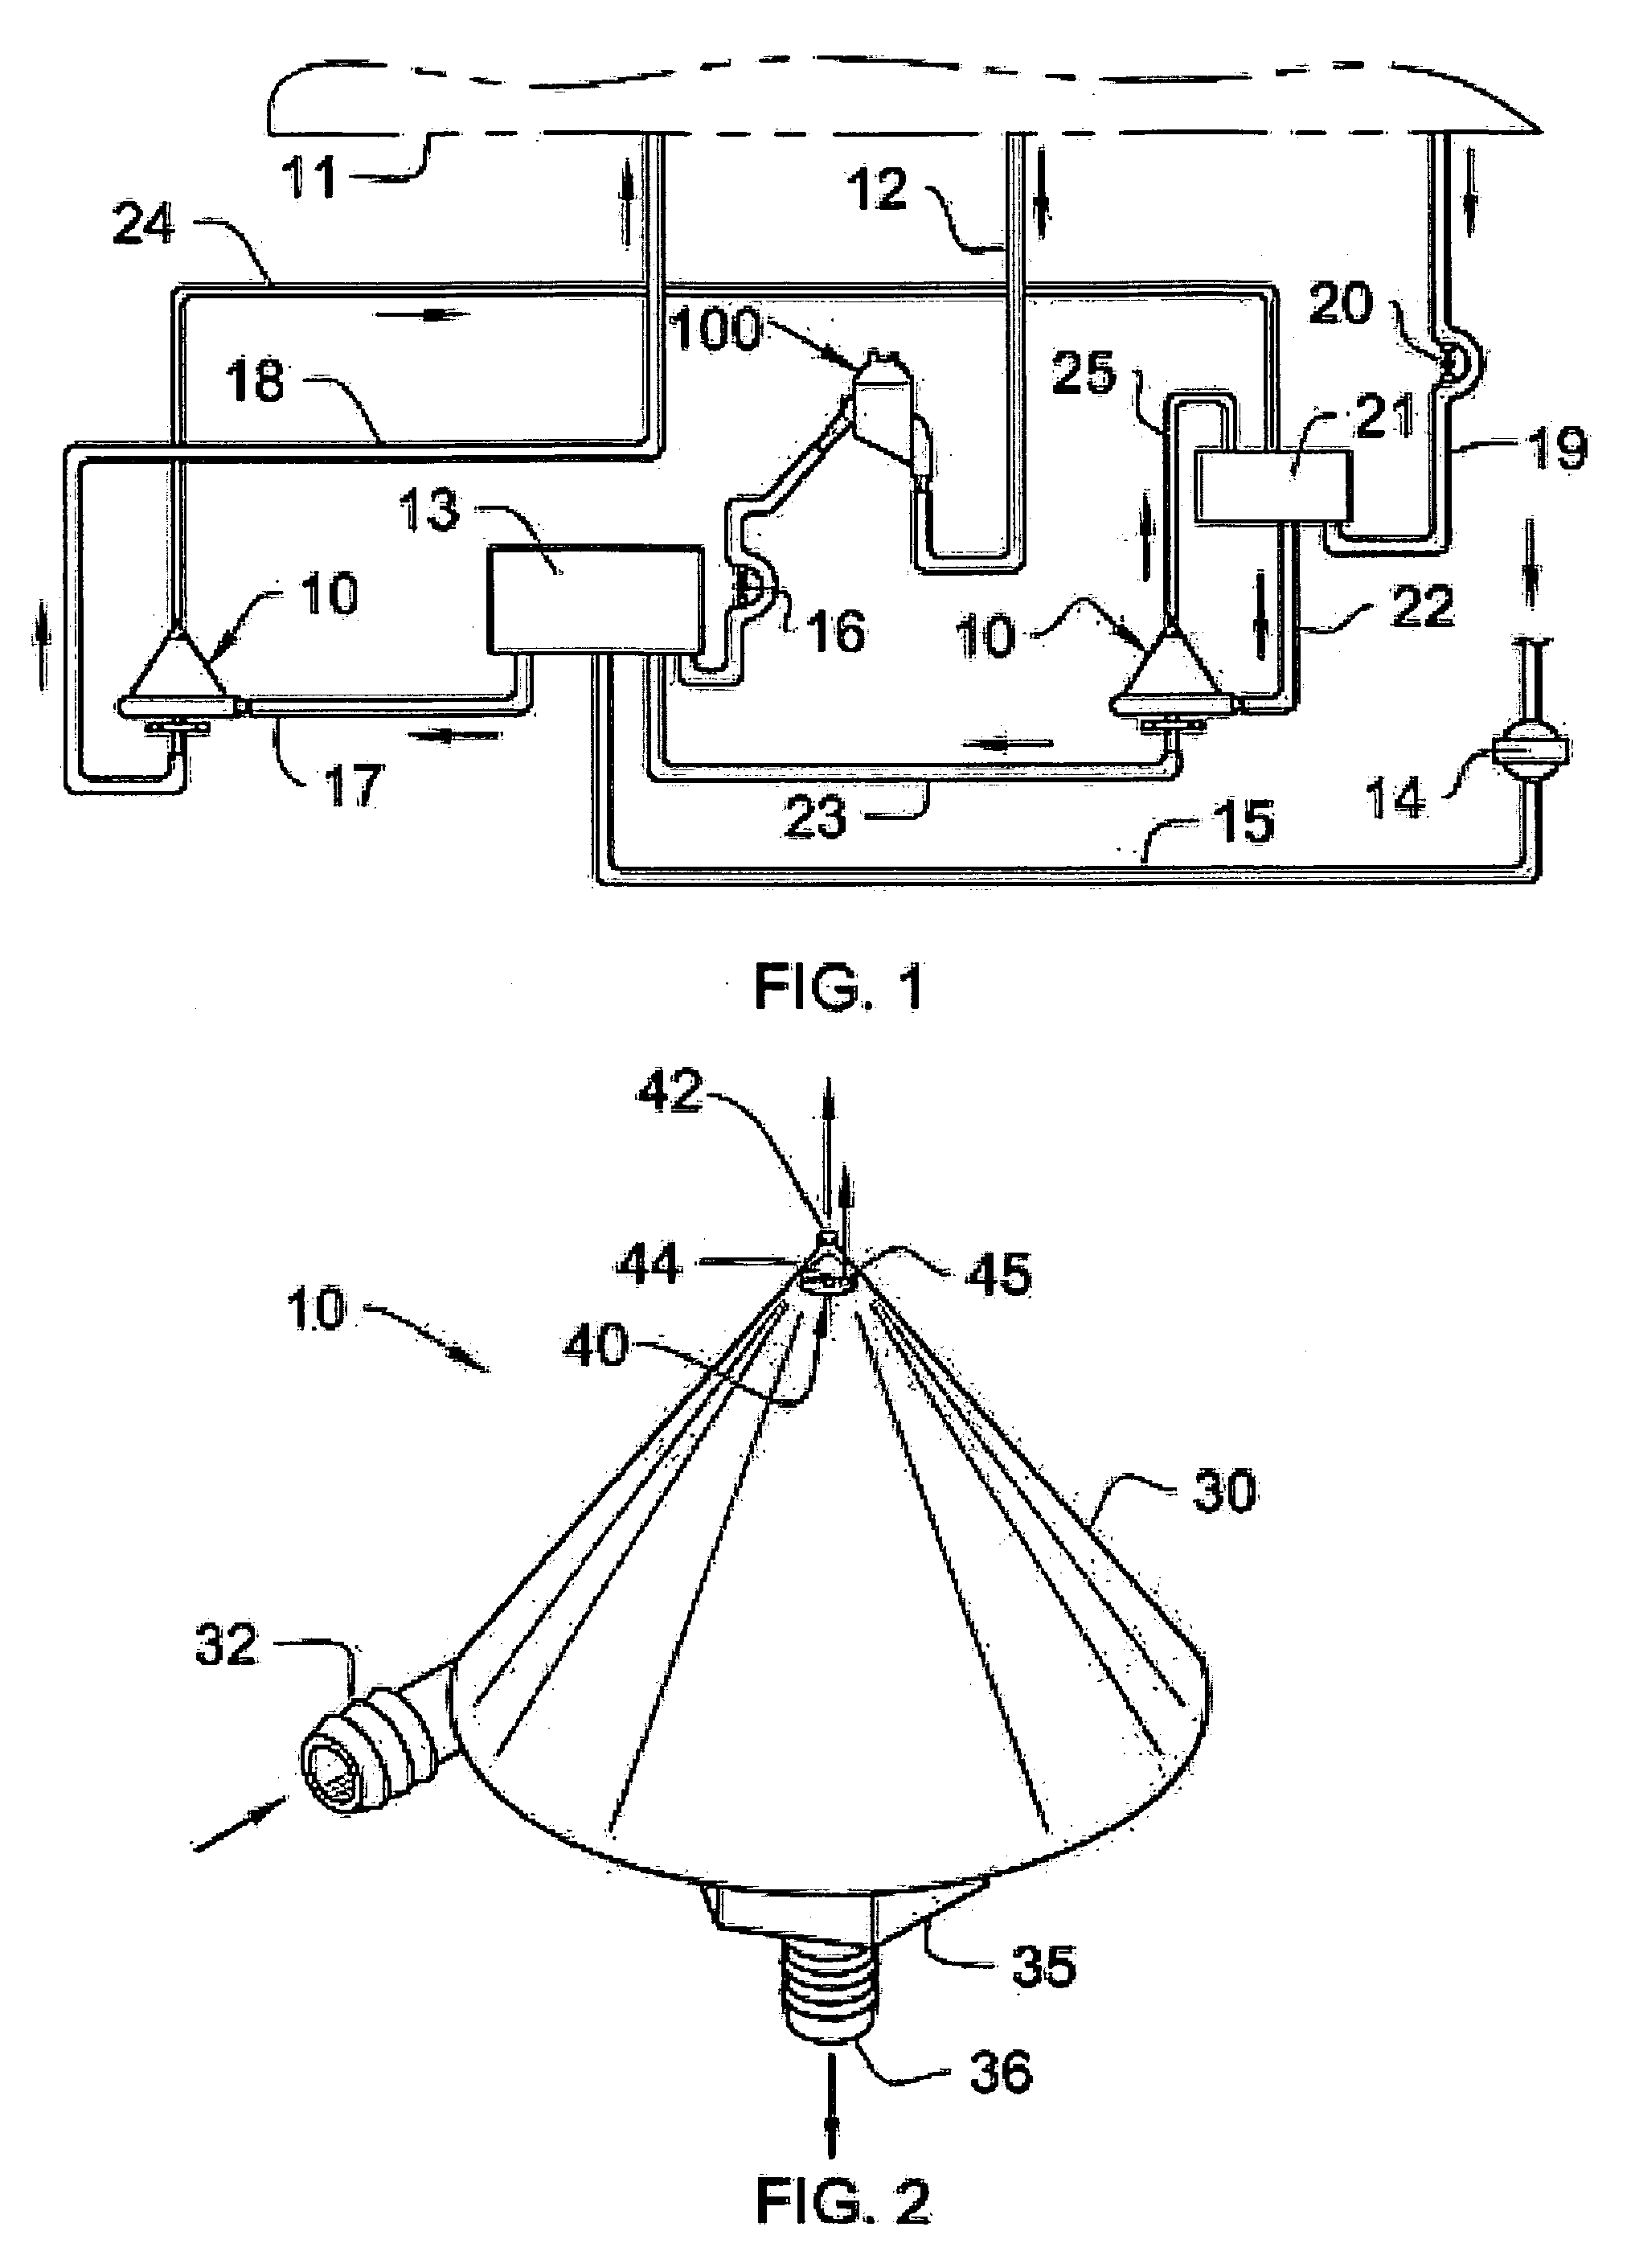 Extracorporeal blood filter system